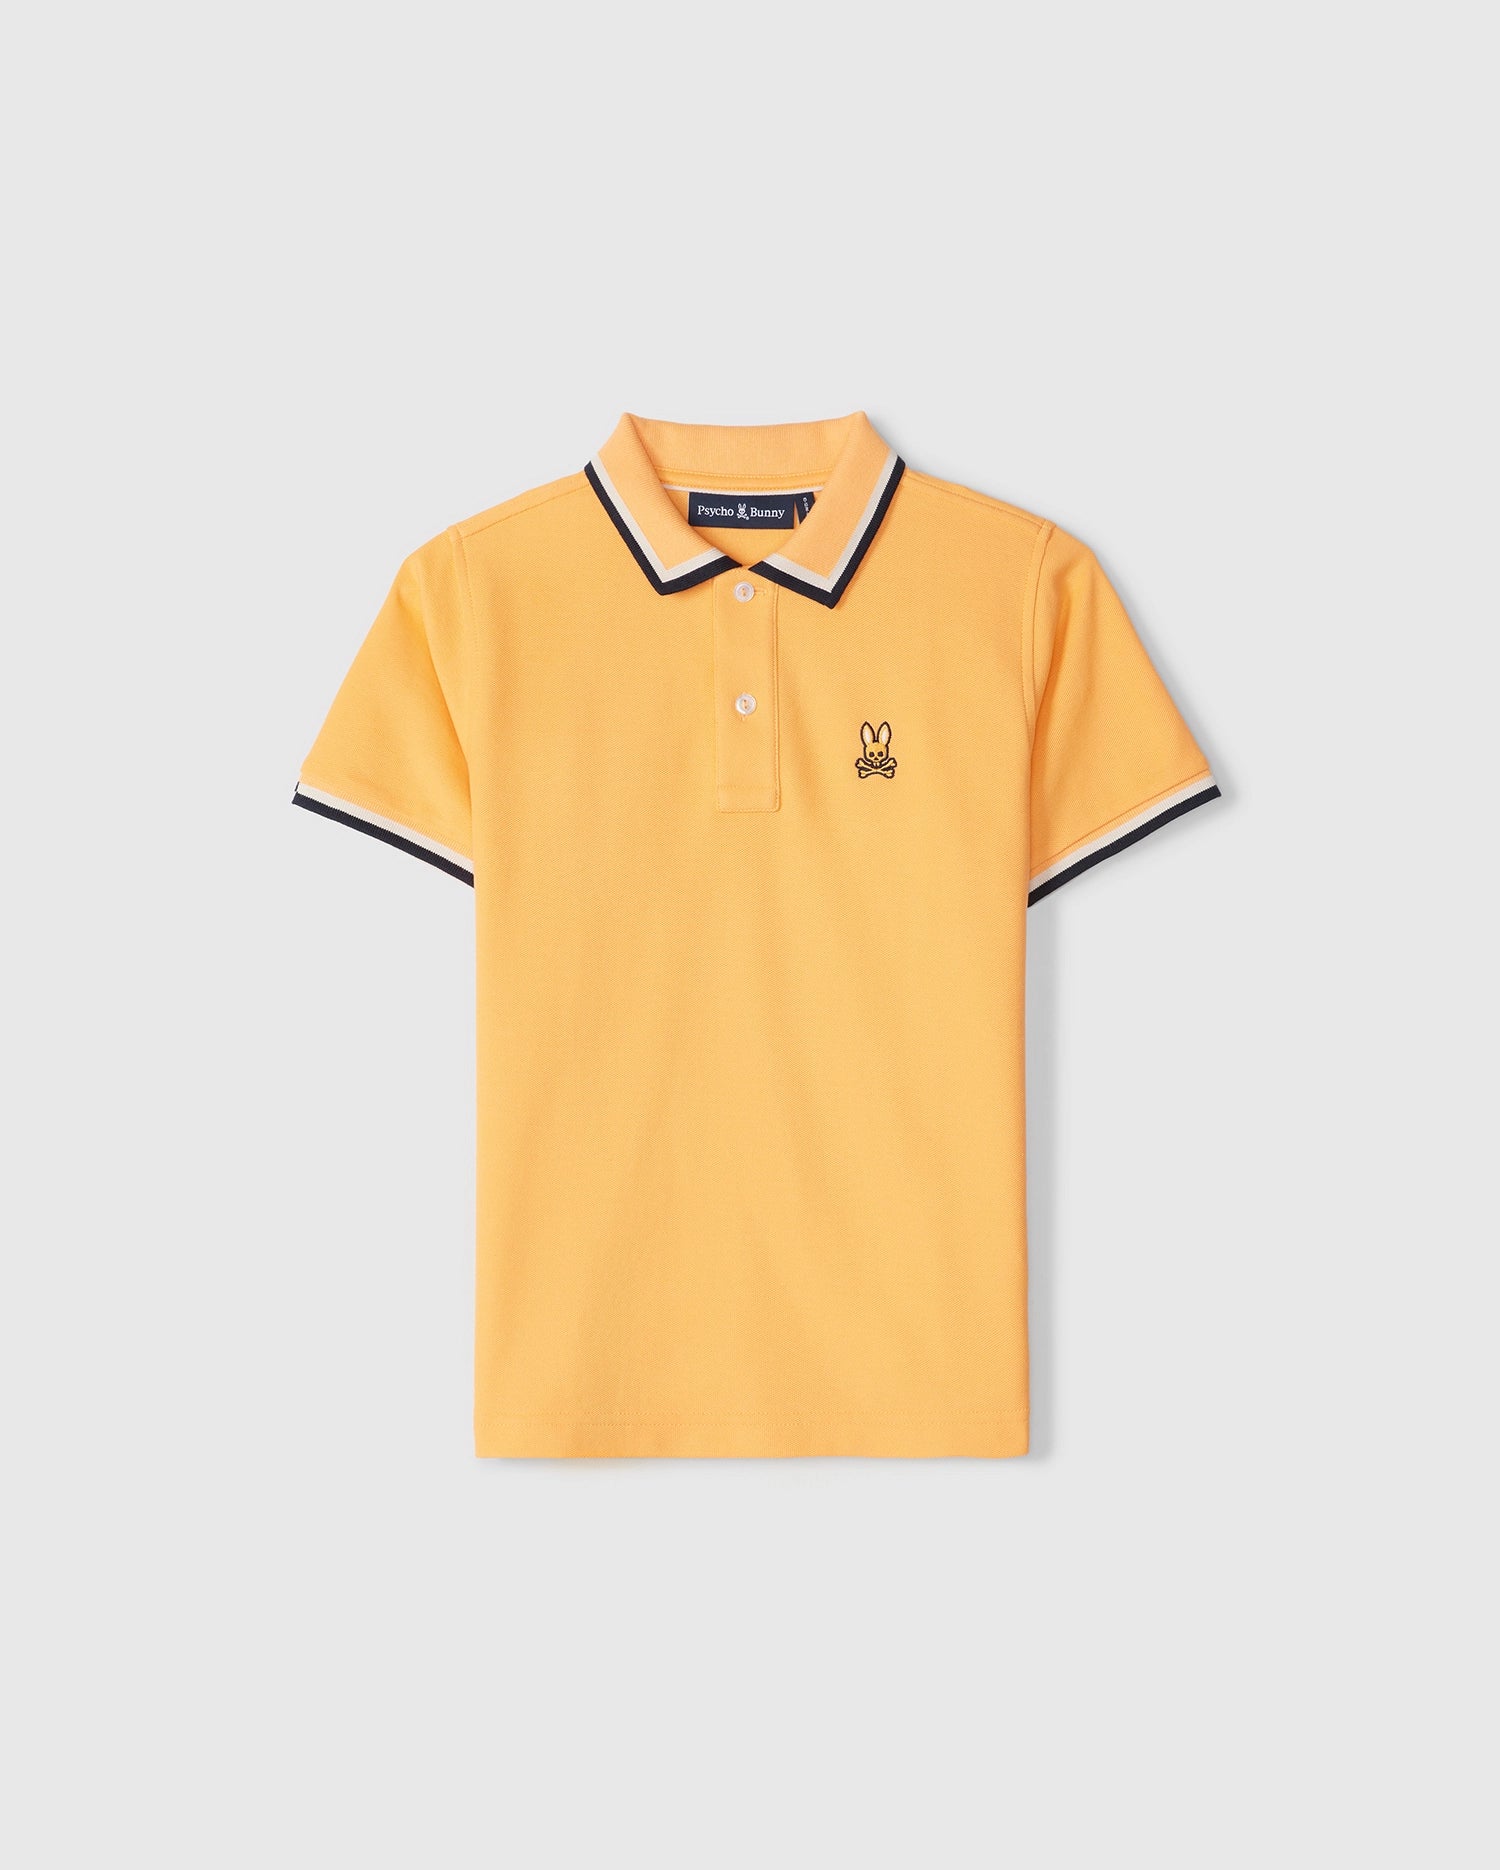 A yellow KIDS KINGSBURY PIQUE POLO SHIRT - B0K235B200 by Psycho Bunny with a classic silhouette, featuring a black and white striped collar and sleeve cuffs. The shirt includes two buttons at the neckline and a small embroidered bunny logo on the left chest.